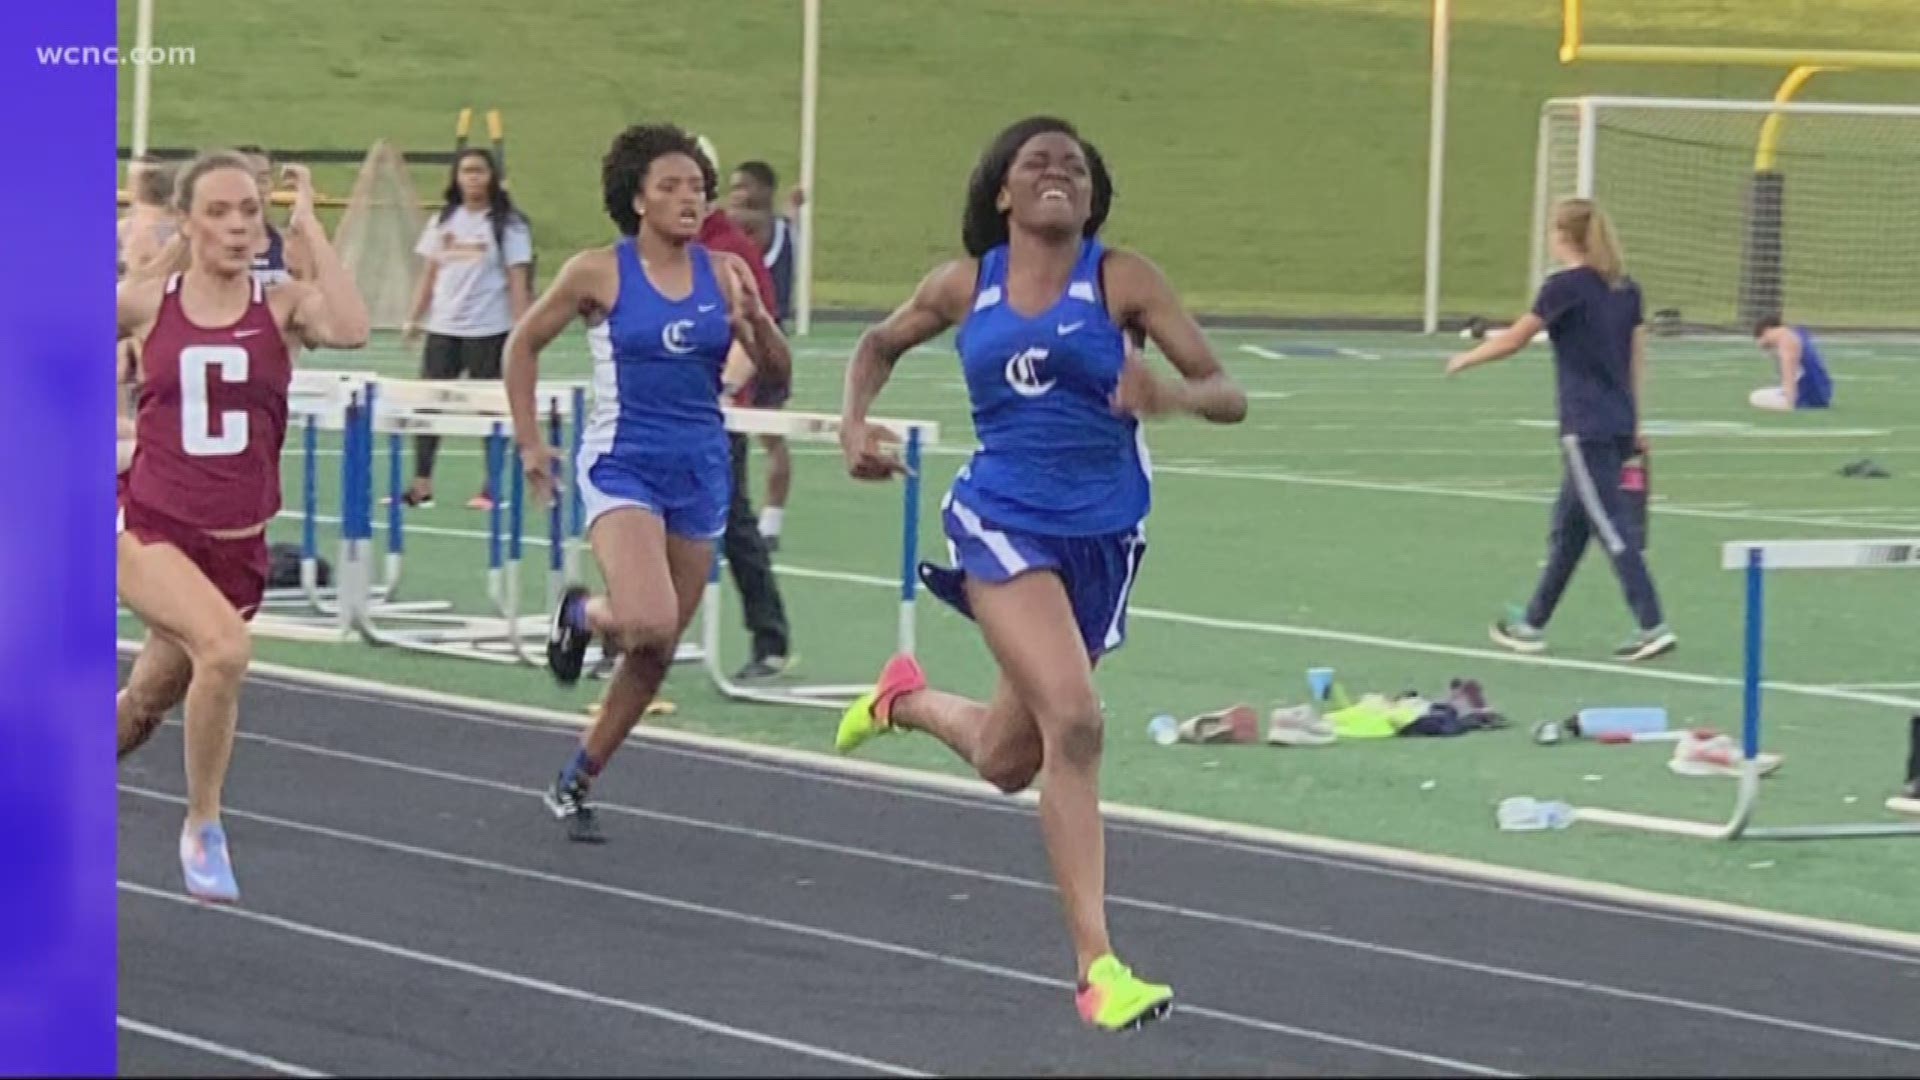 Igbinadolor is a Track athlete at Charlotte Christian where her track future is looking particularly bright.